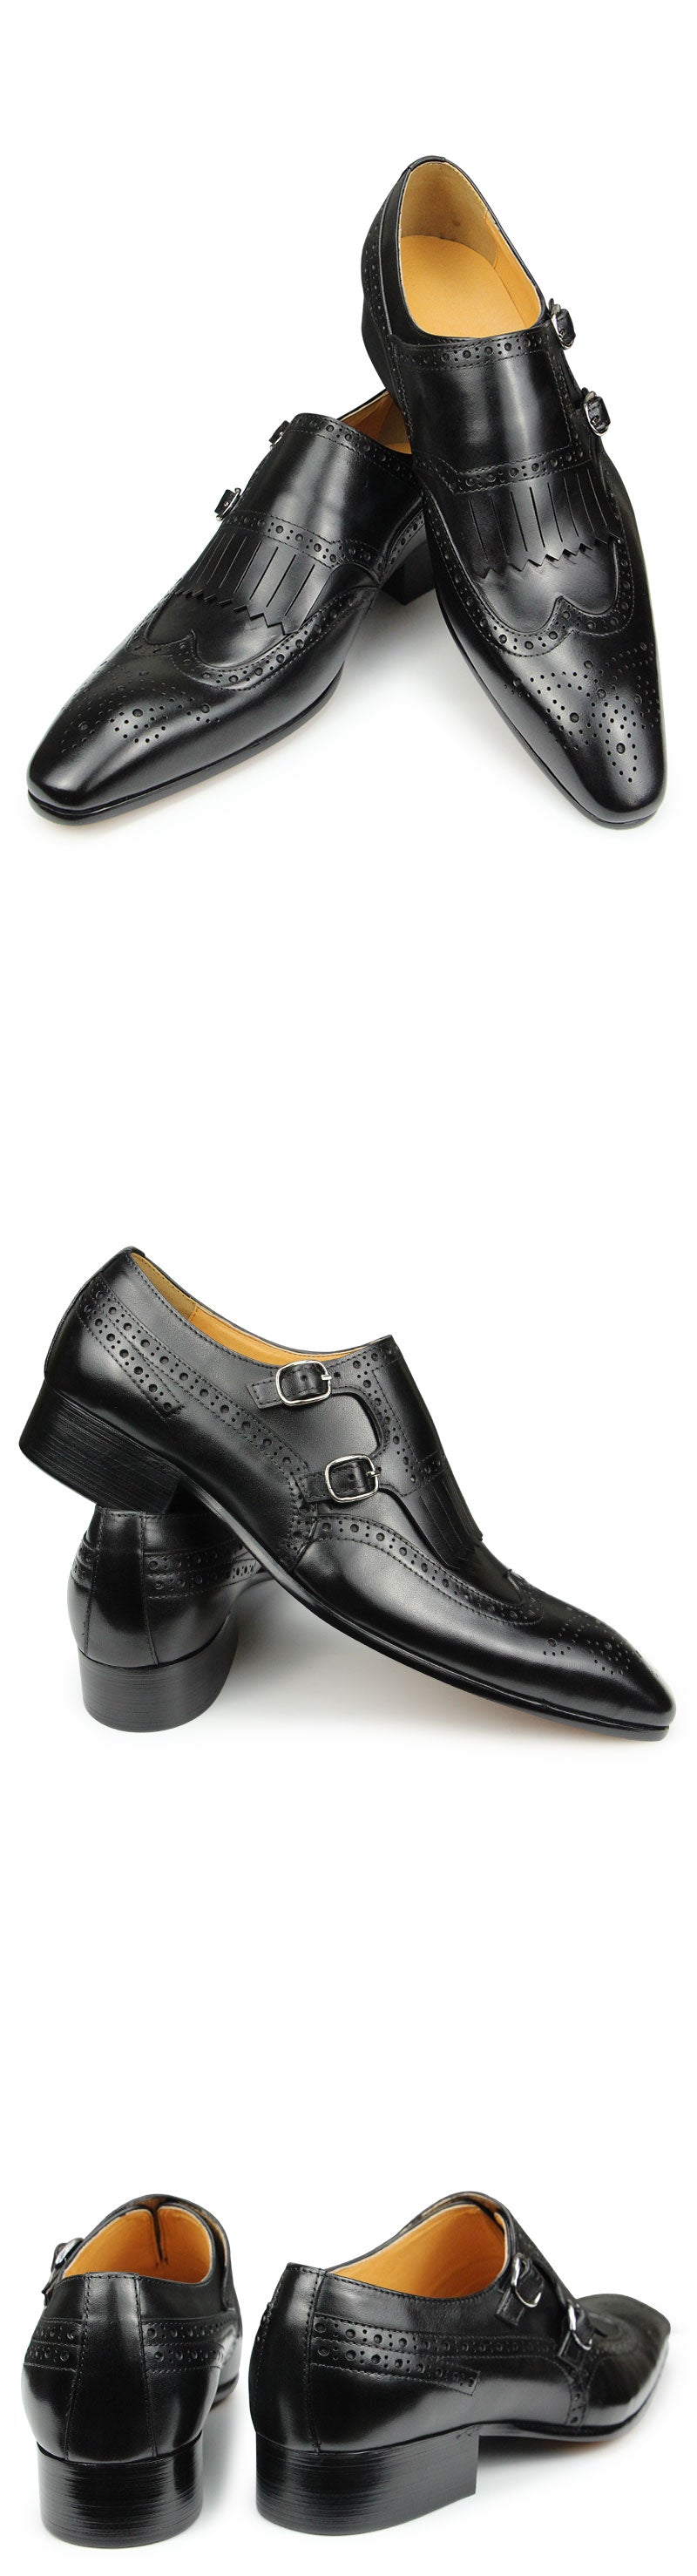 Double Monk Strap Comfortable Men's Dress Shoes| All For Me Today